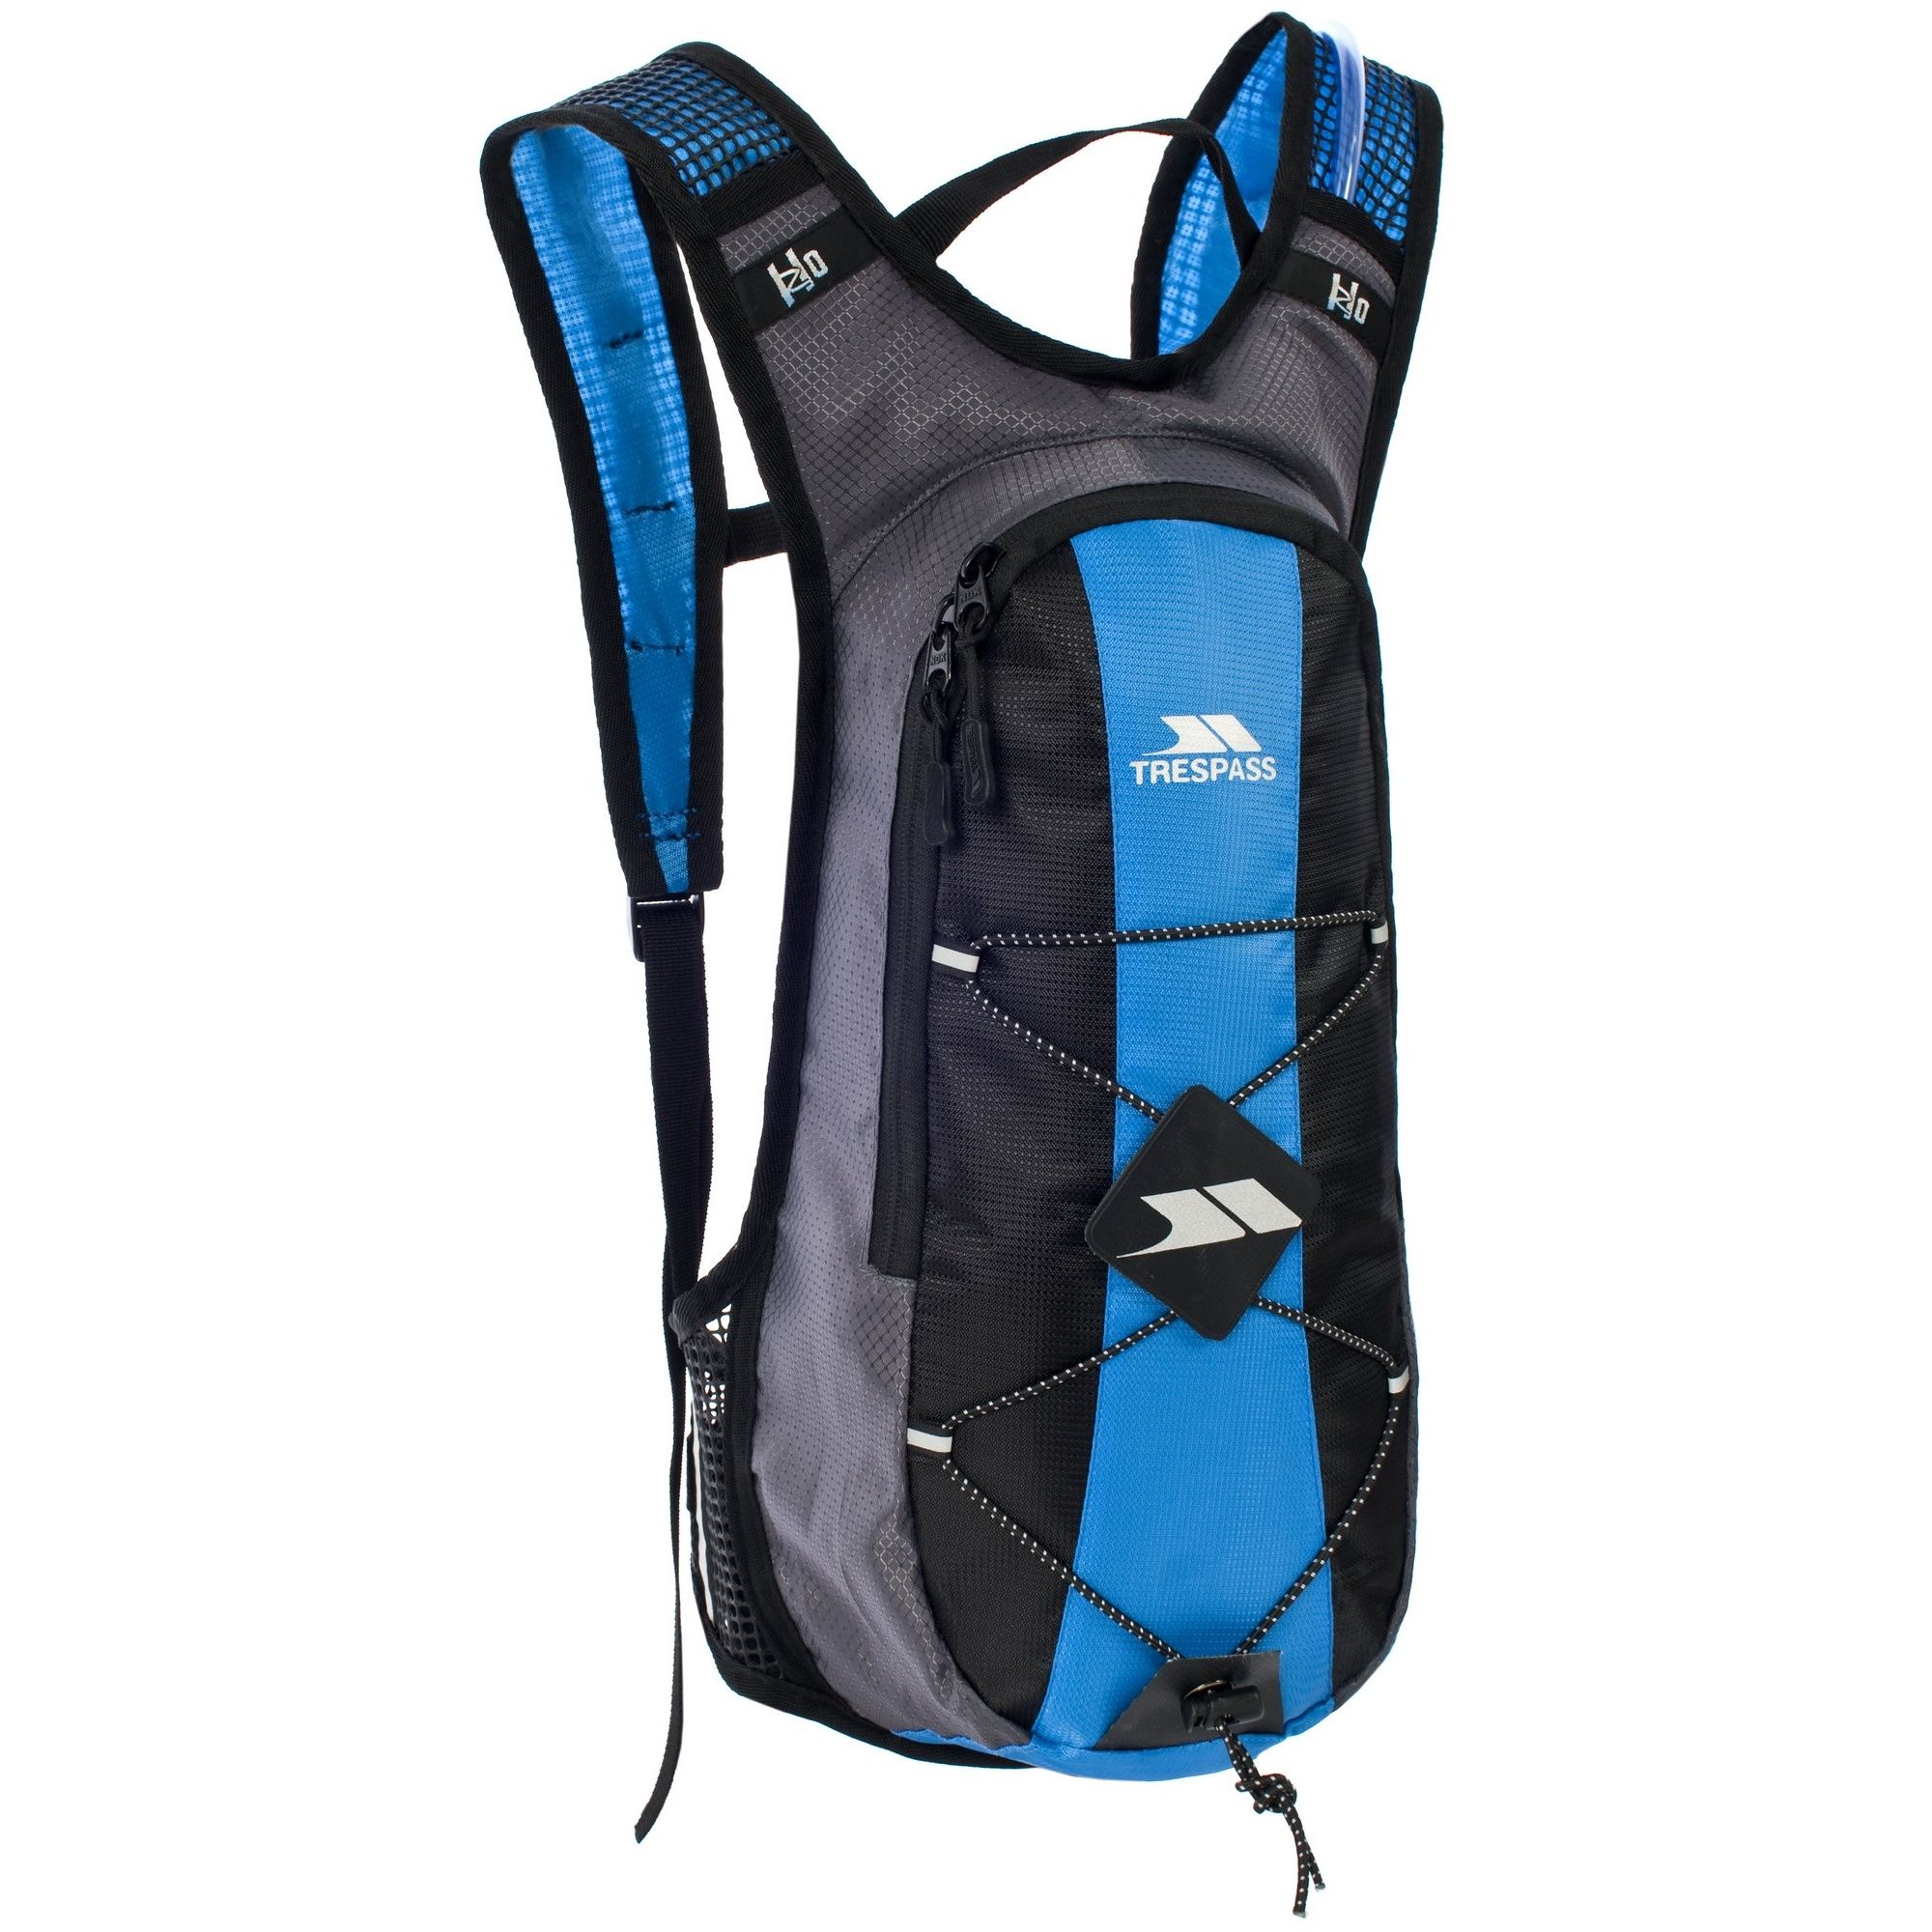 15 Litre Hydration Rucksack. 2 Litre Water Reservoir. Waist and chest straps. 100% Polyester PU Coated.